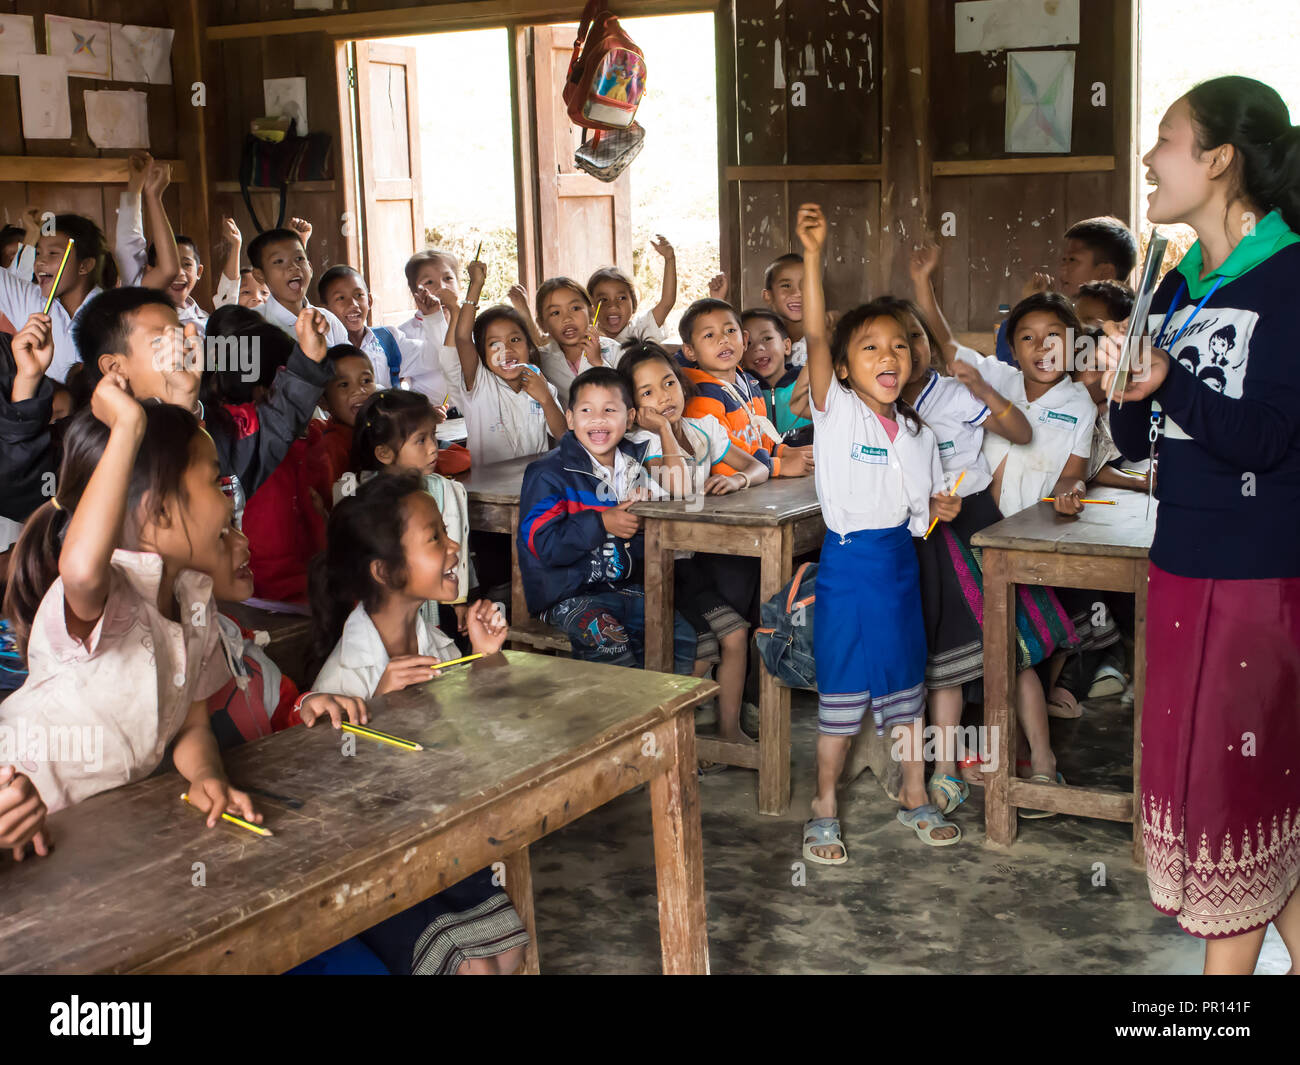 Primary school classroom full of students, Houy Mieng village, Laos, Indochina, Southeast Asia, Asia Stock Photo